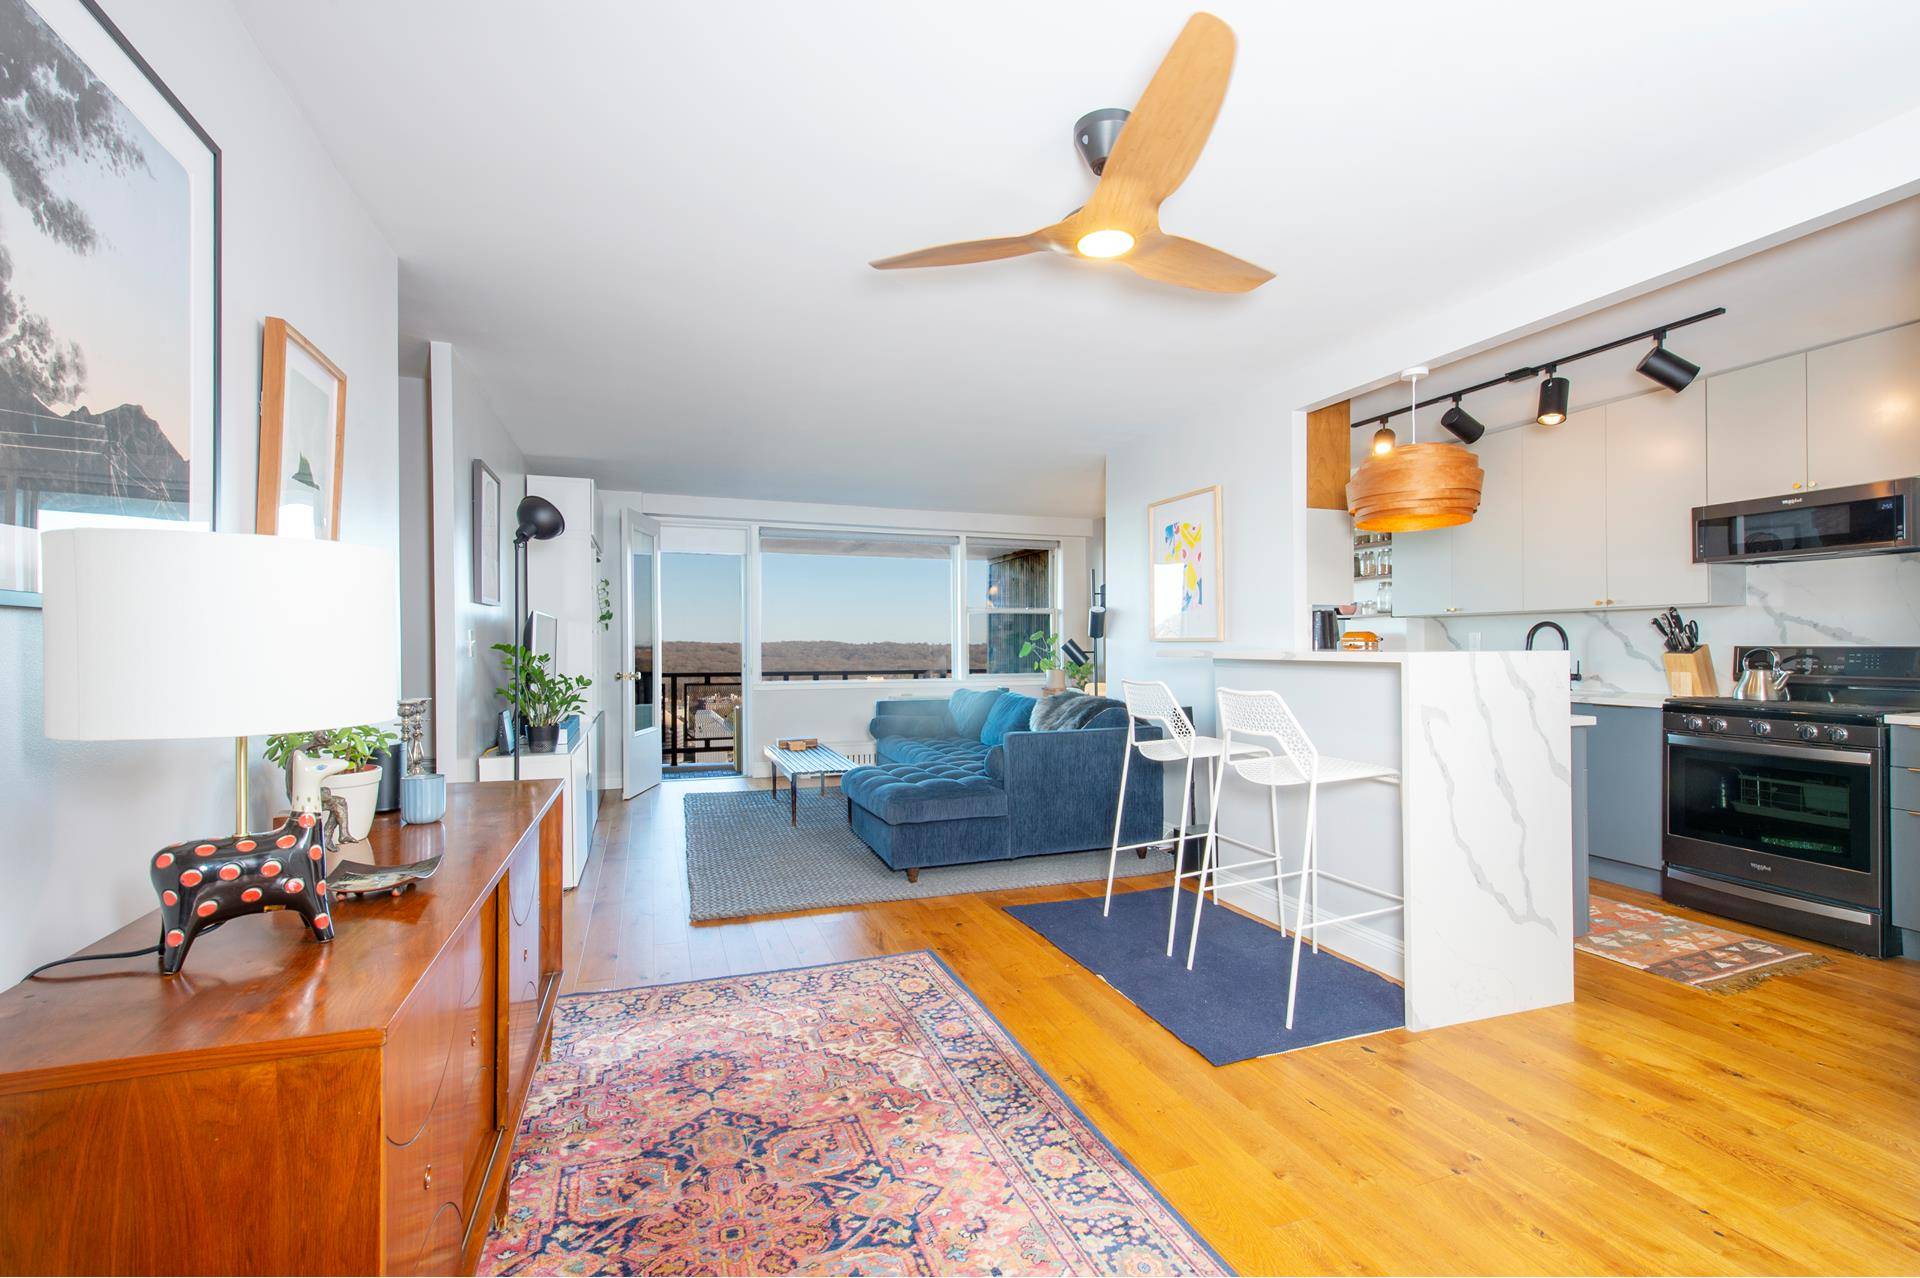 ALL OPEN HOUSES ARE BY APPOINTMENT ONLY This full size two bedroom has been recently renovated with the finest attention to detail, featuring a Scandinavian and mid century modern aesthetic, ...